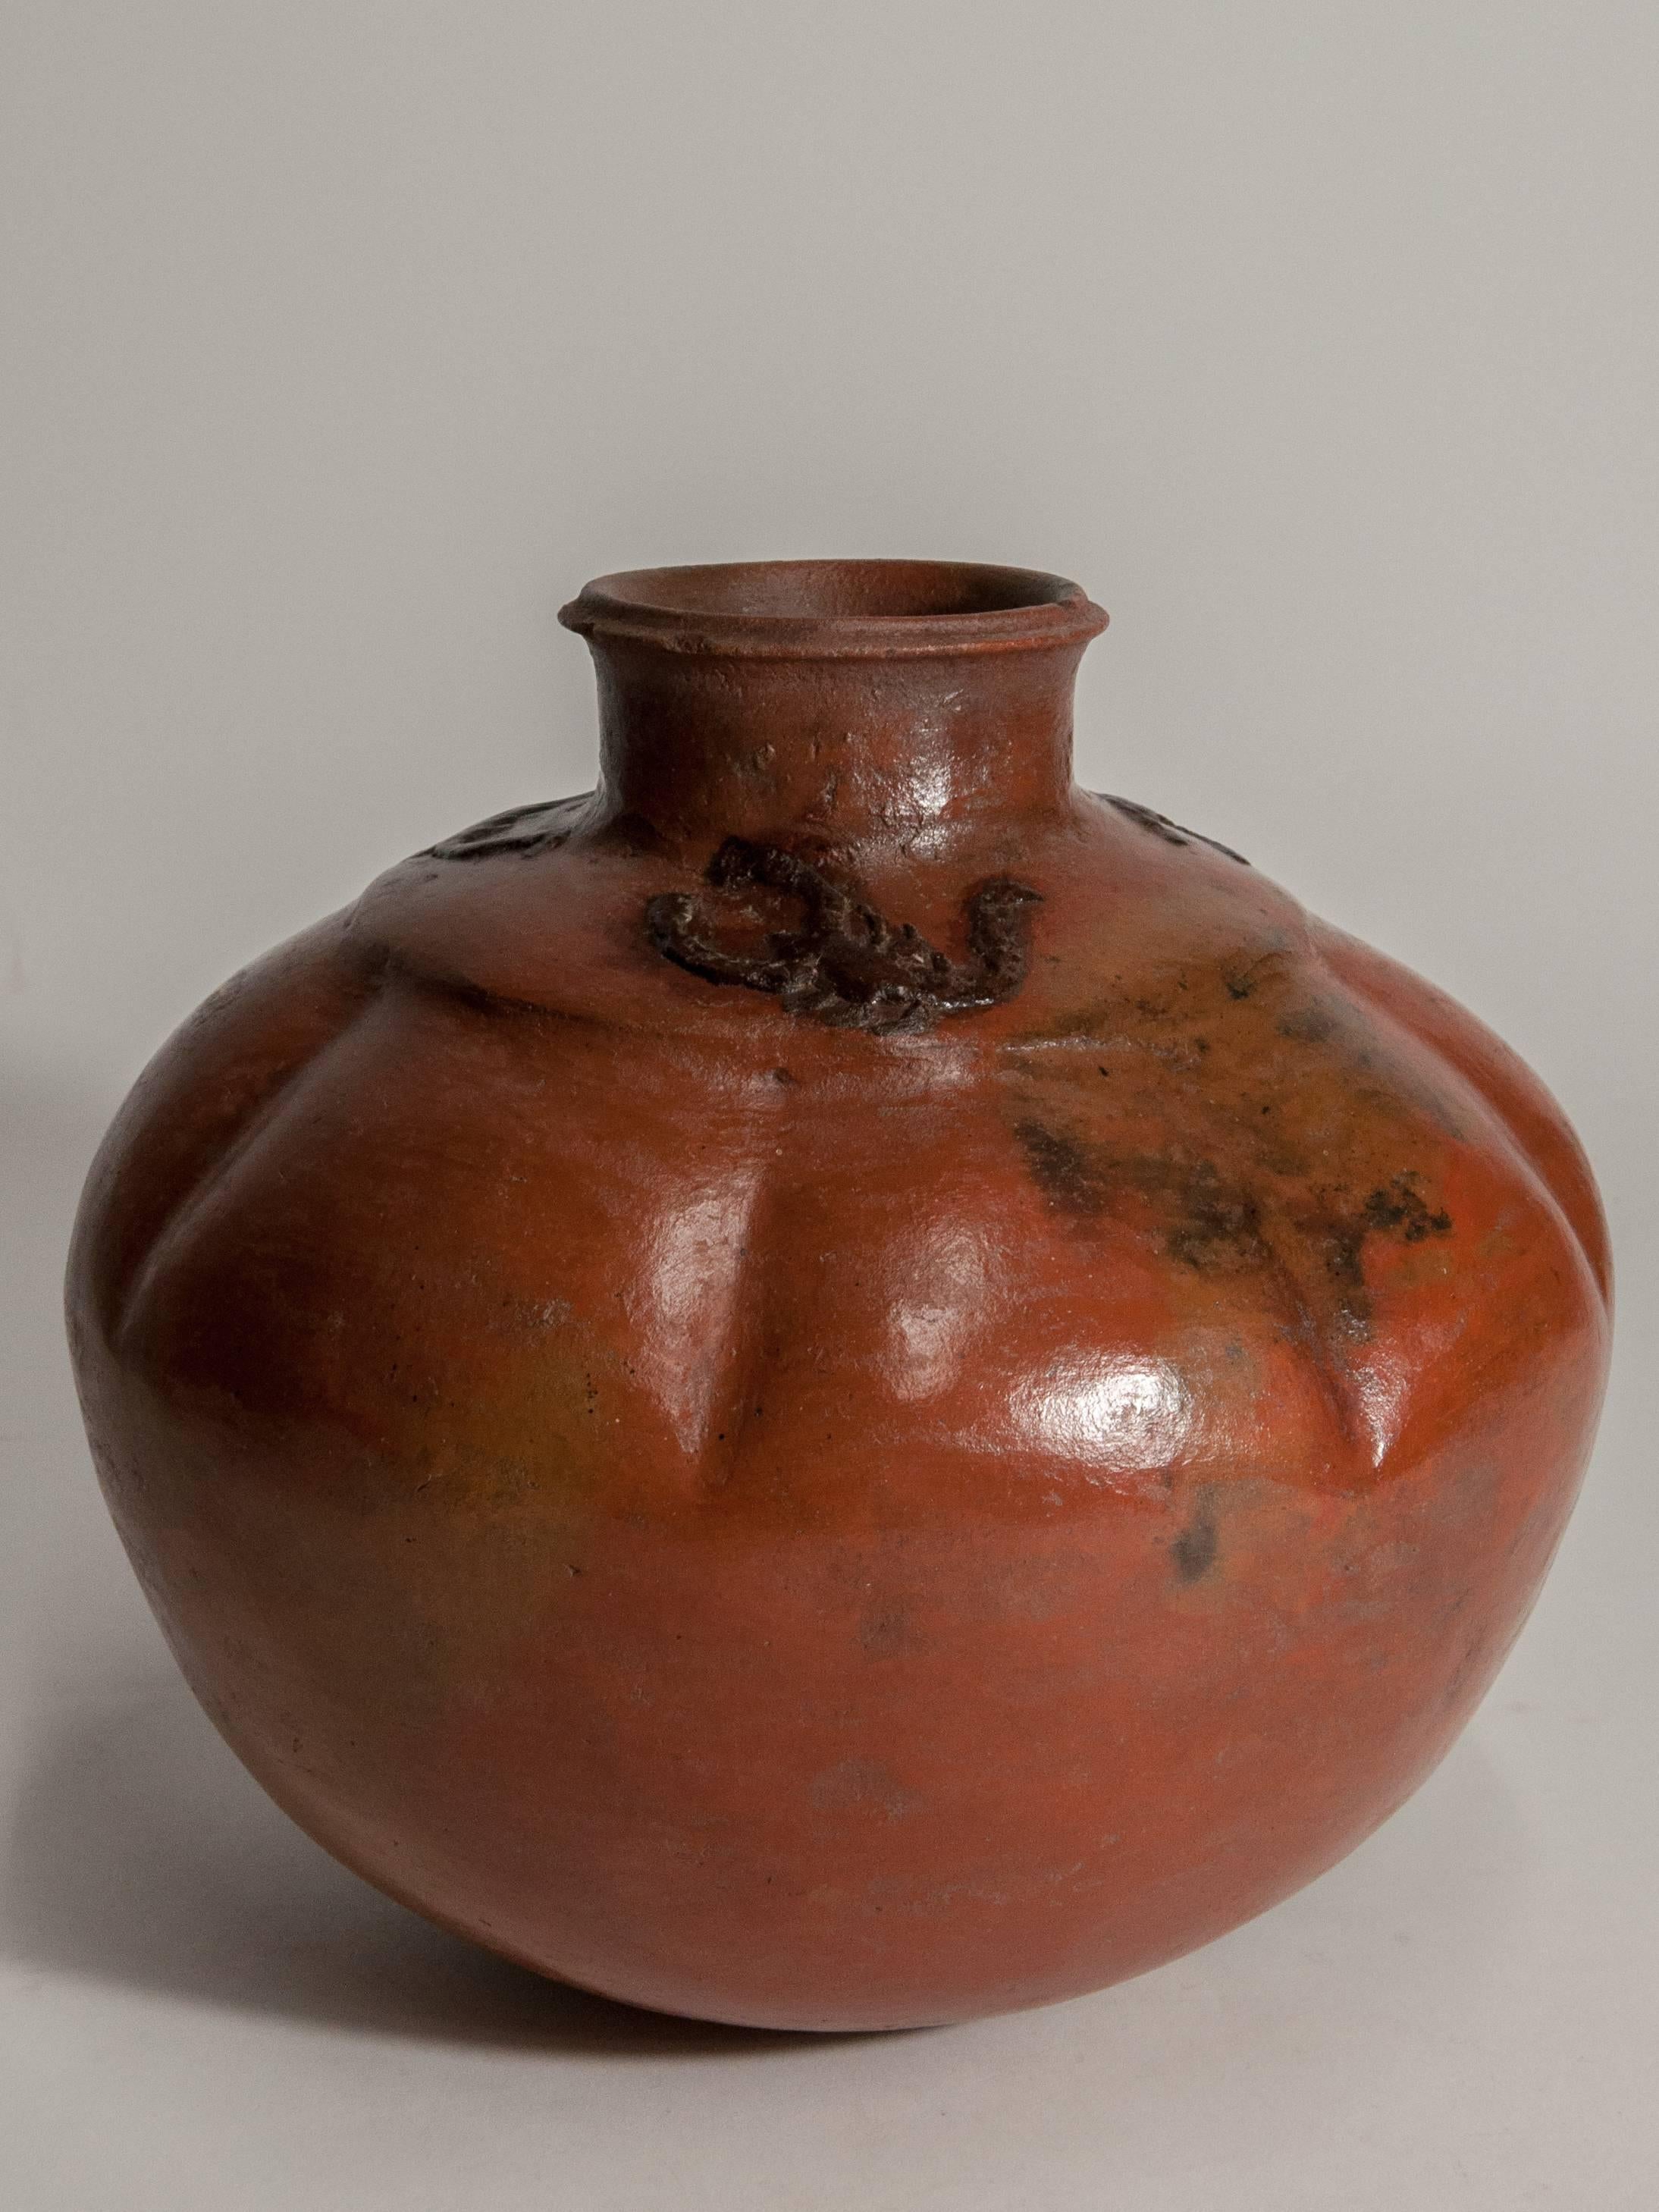 Earthenware pot with scorpion motifs surrounding the base of the neck. Sumba island. East Indonesia, mid-late 20th century.
This low fired, hand formed and burnished pot comes from Sumba island in east Indonesia and would have been used to store